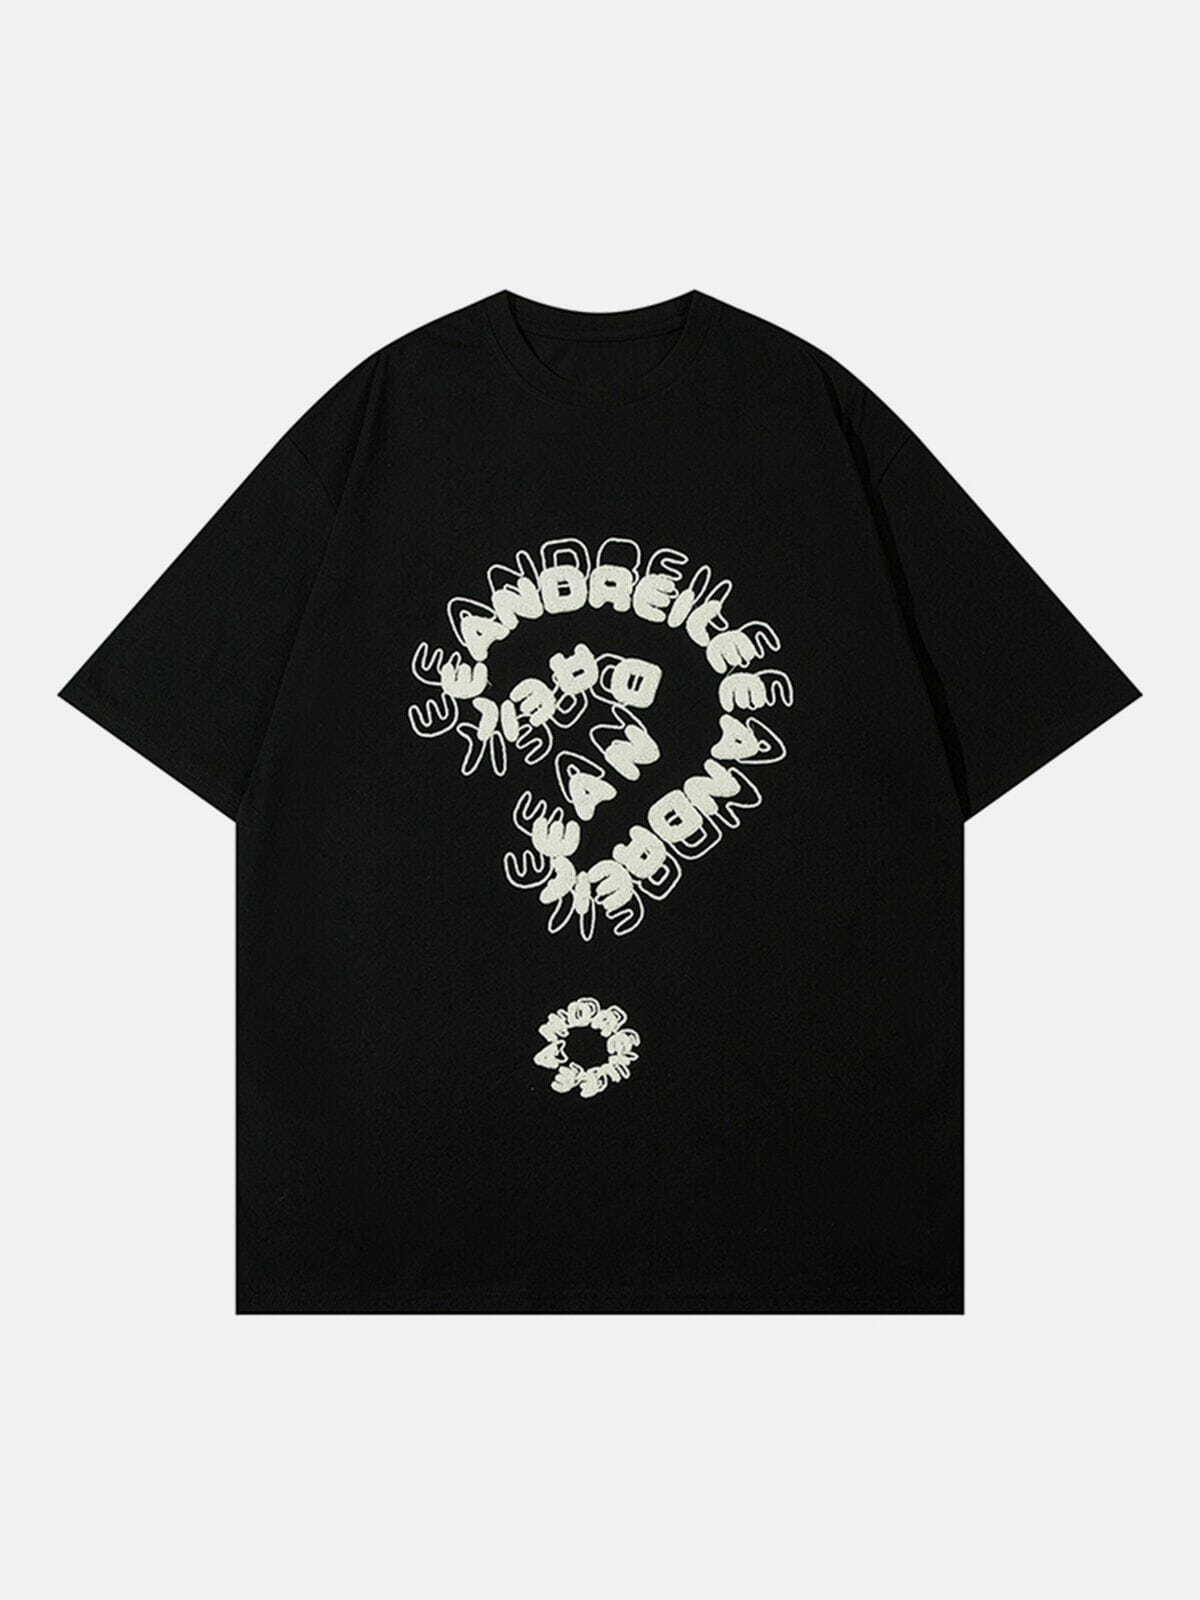 embroidered question mark tee quirky & streetwear iconic 8436